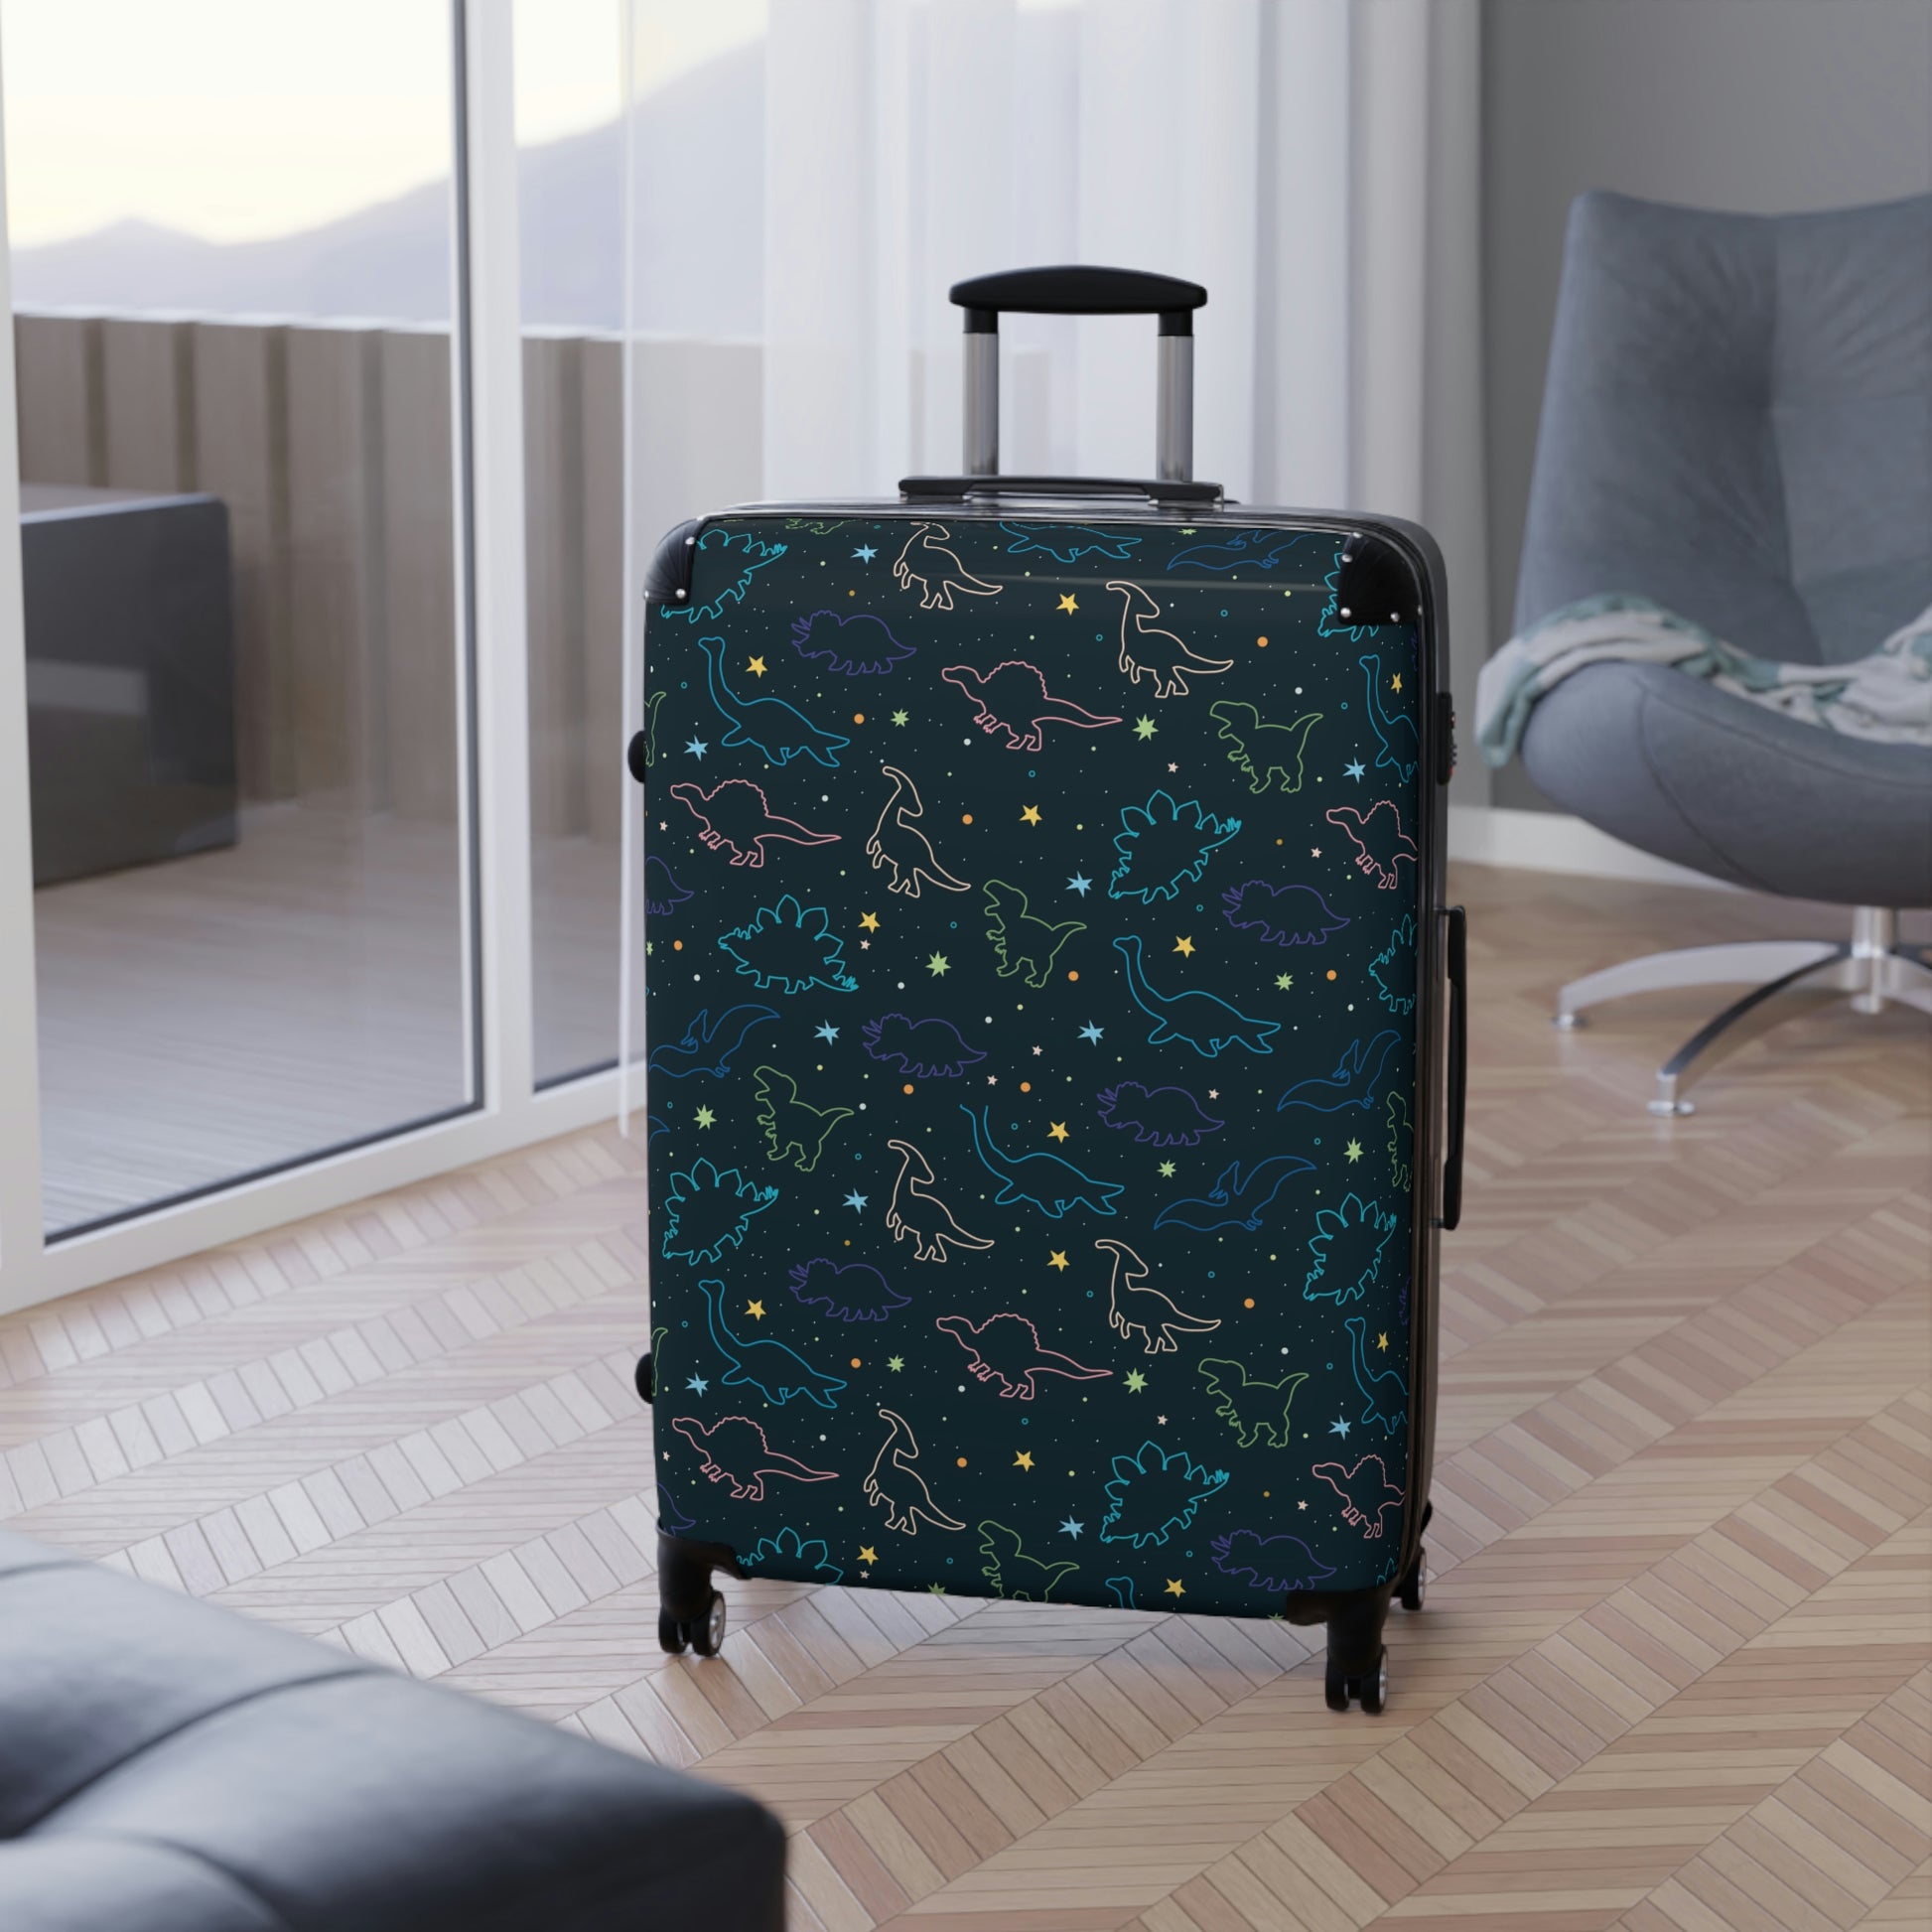 Dinosaur Suitcase Luggage, Carry On With 4 Wheels Cabin Travel Small Large Set Rolling Spinner Lock Decorative Designer Hard Shell Case Starcove Fashion